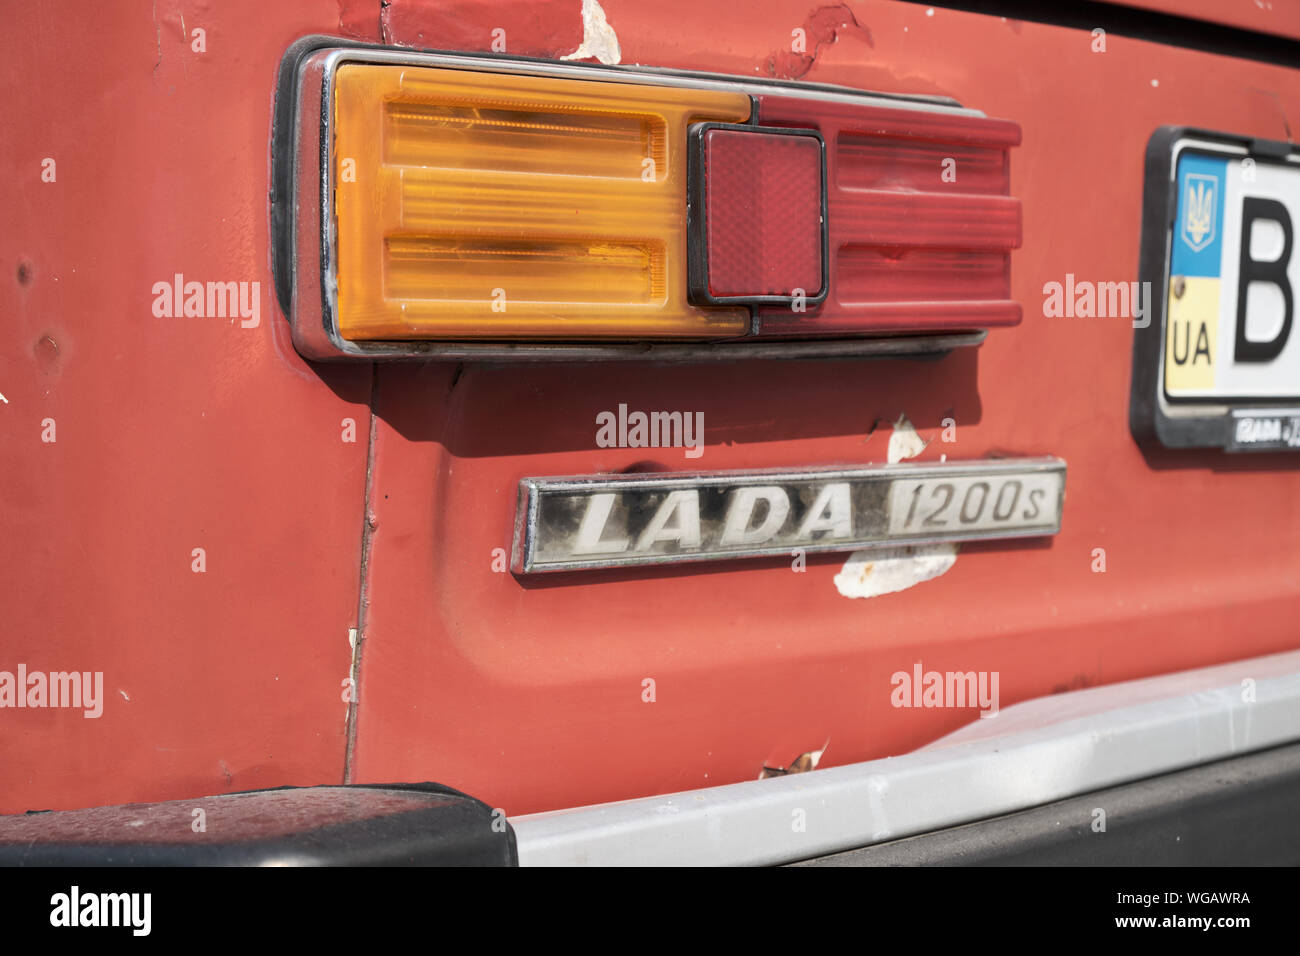 Close up of Lada 1200s name with Rear light and UA license label Stock Photo